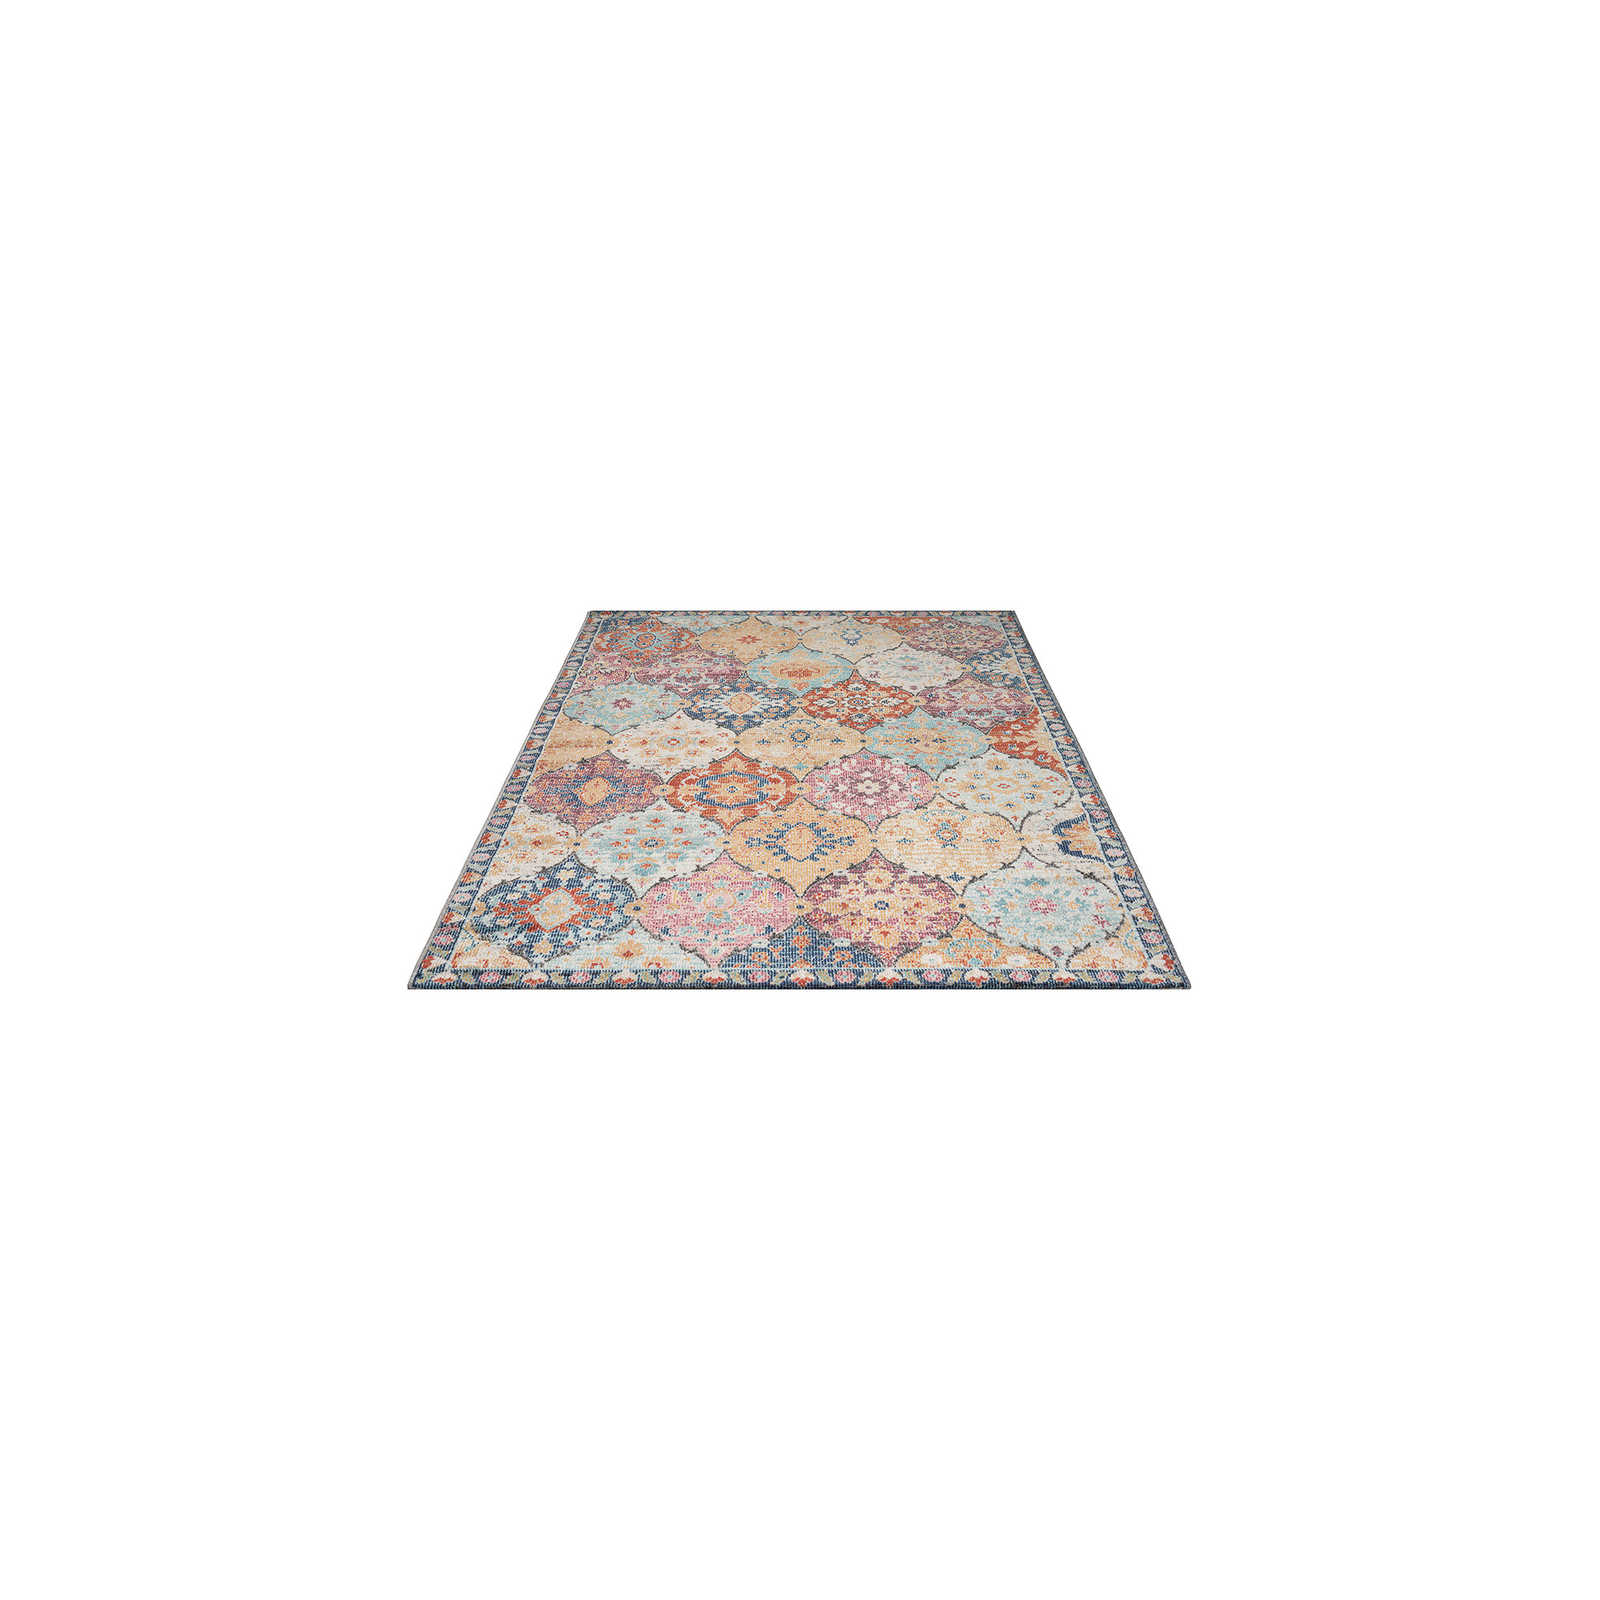 Colourful Flatweave Outdoor Rug - 170 x 120 cm
